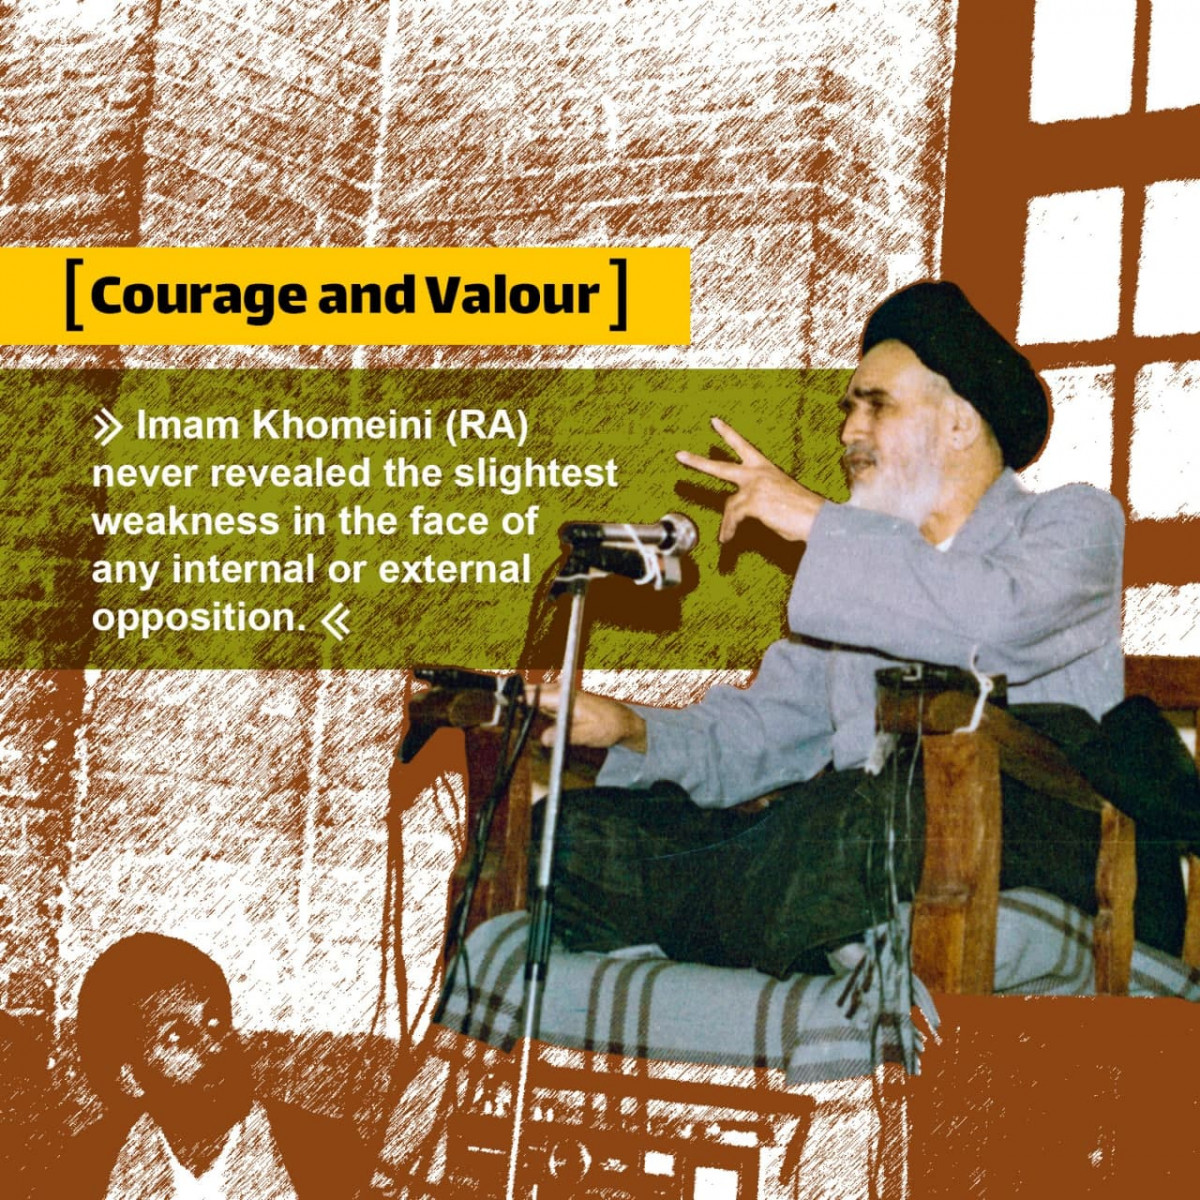 Courage and Valour